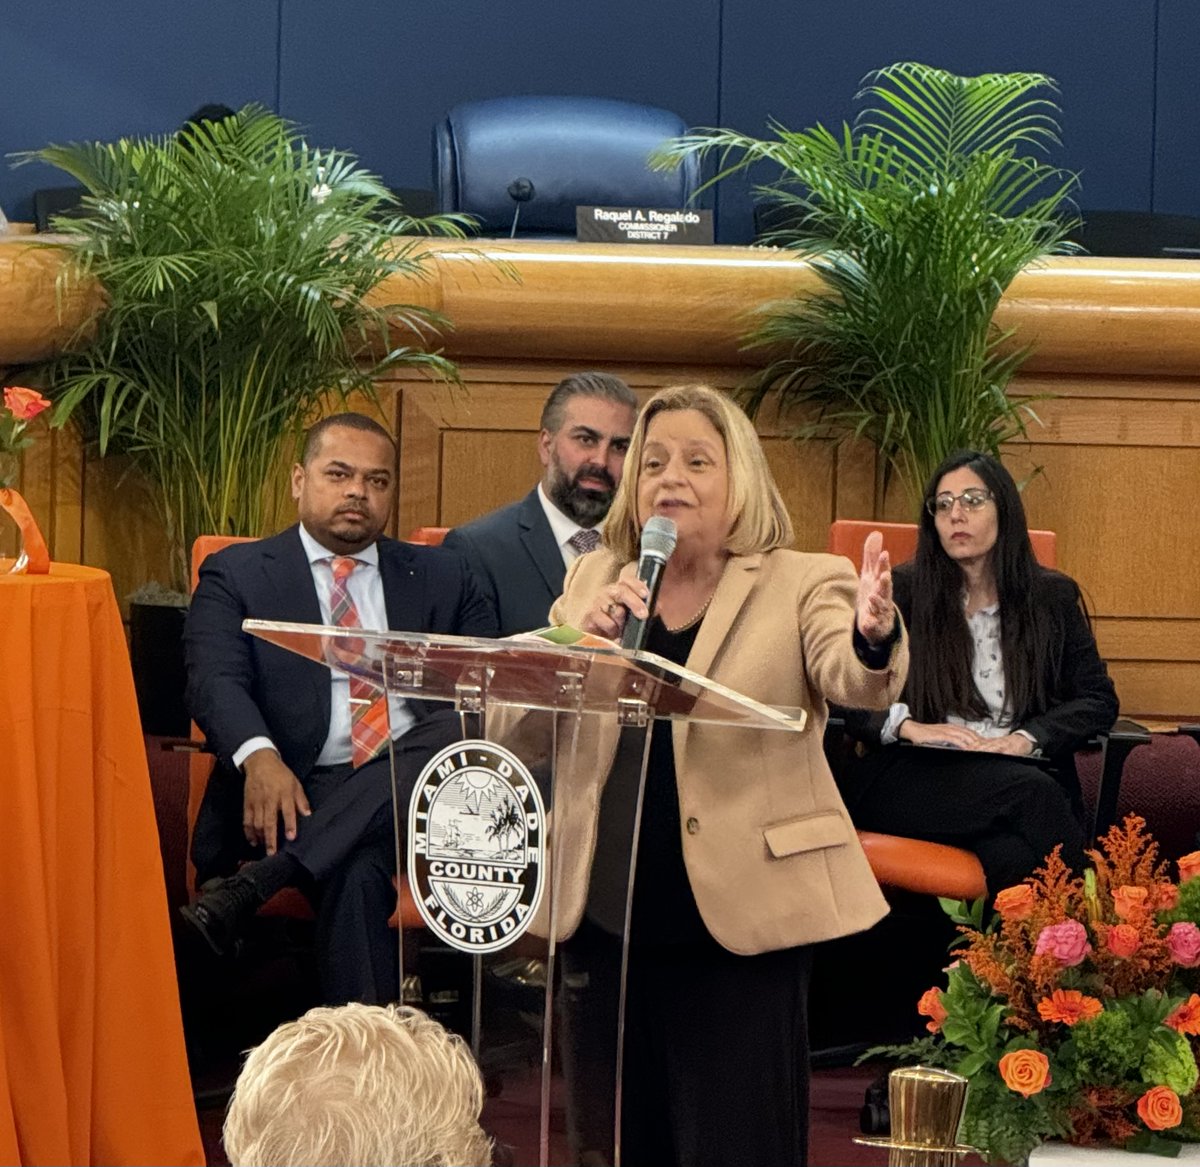 👏🌴Happy Times today as two of our strongest @FIU champions, Ileana @RosLehtinen + @RepWilson are inducted into @MiamiDadeCounty #WomensHallofFame at @MiamiDadeBCC w/many friends @FIUalumni from all over and @MDCPS. Both are tireless educators + Public Servants. #IMPACTMATTERS